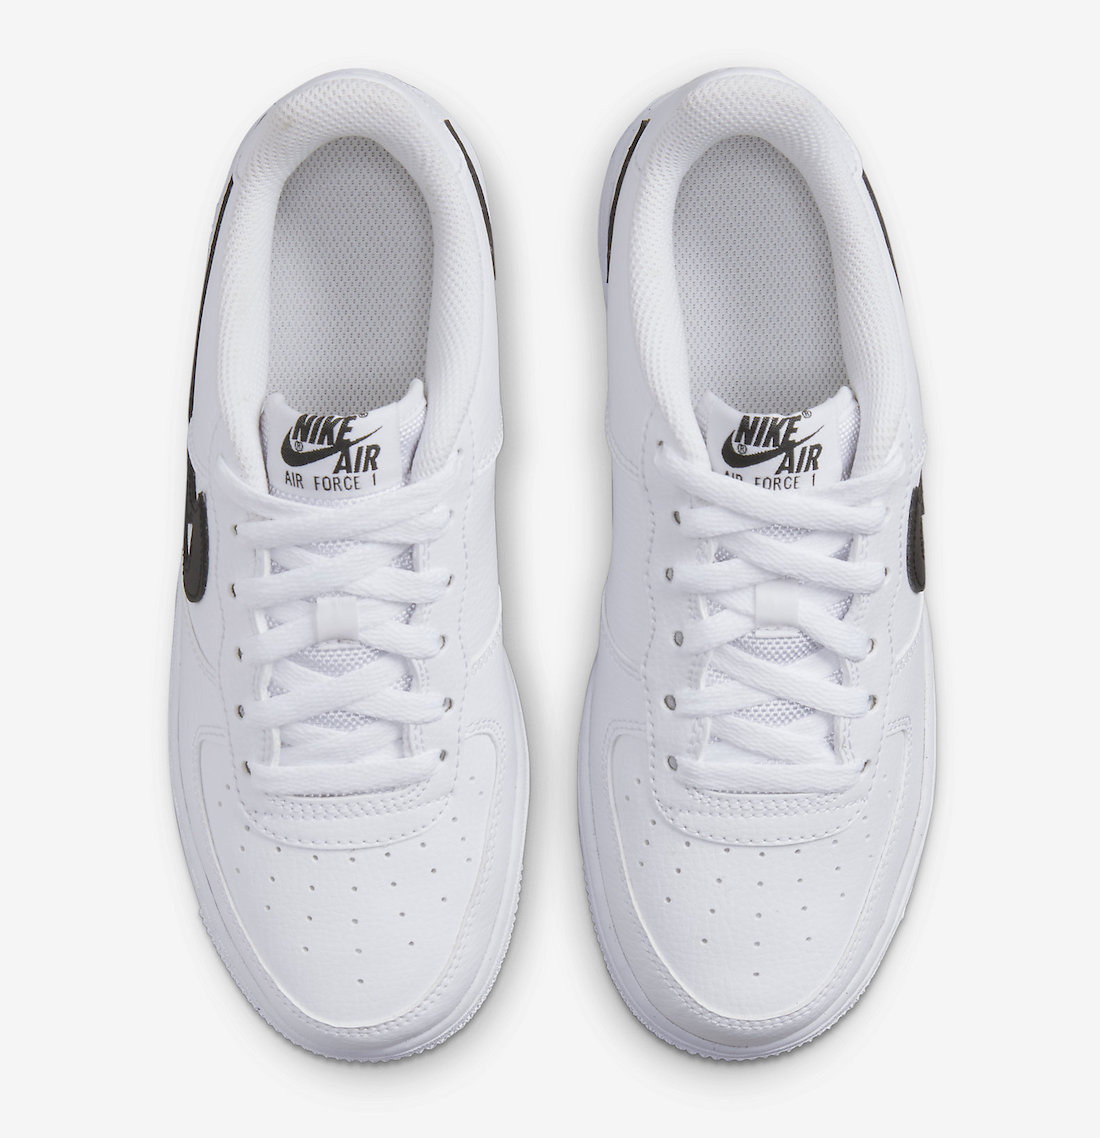 Nike Air Force 1 Low FM White Black DR7889-100 Release Date